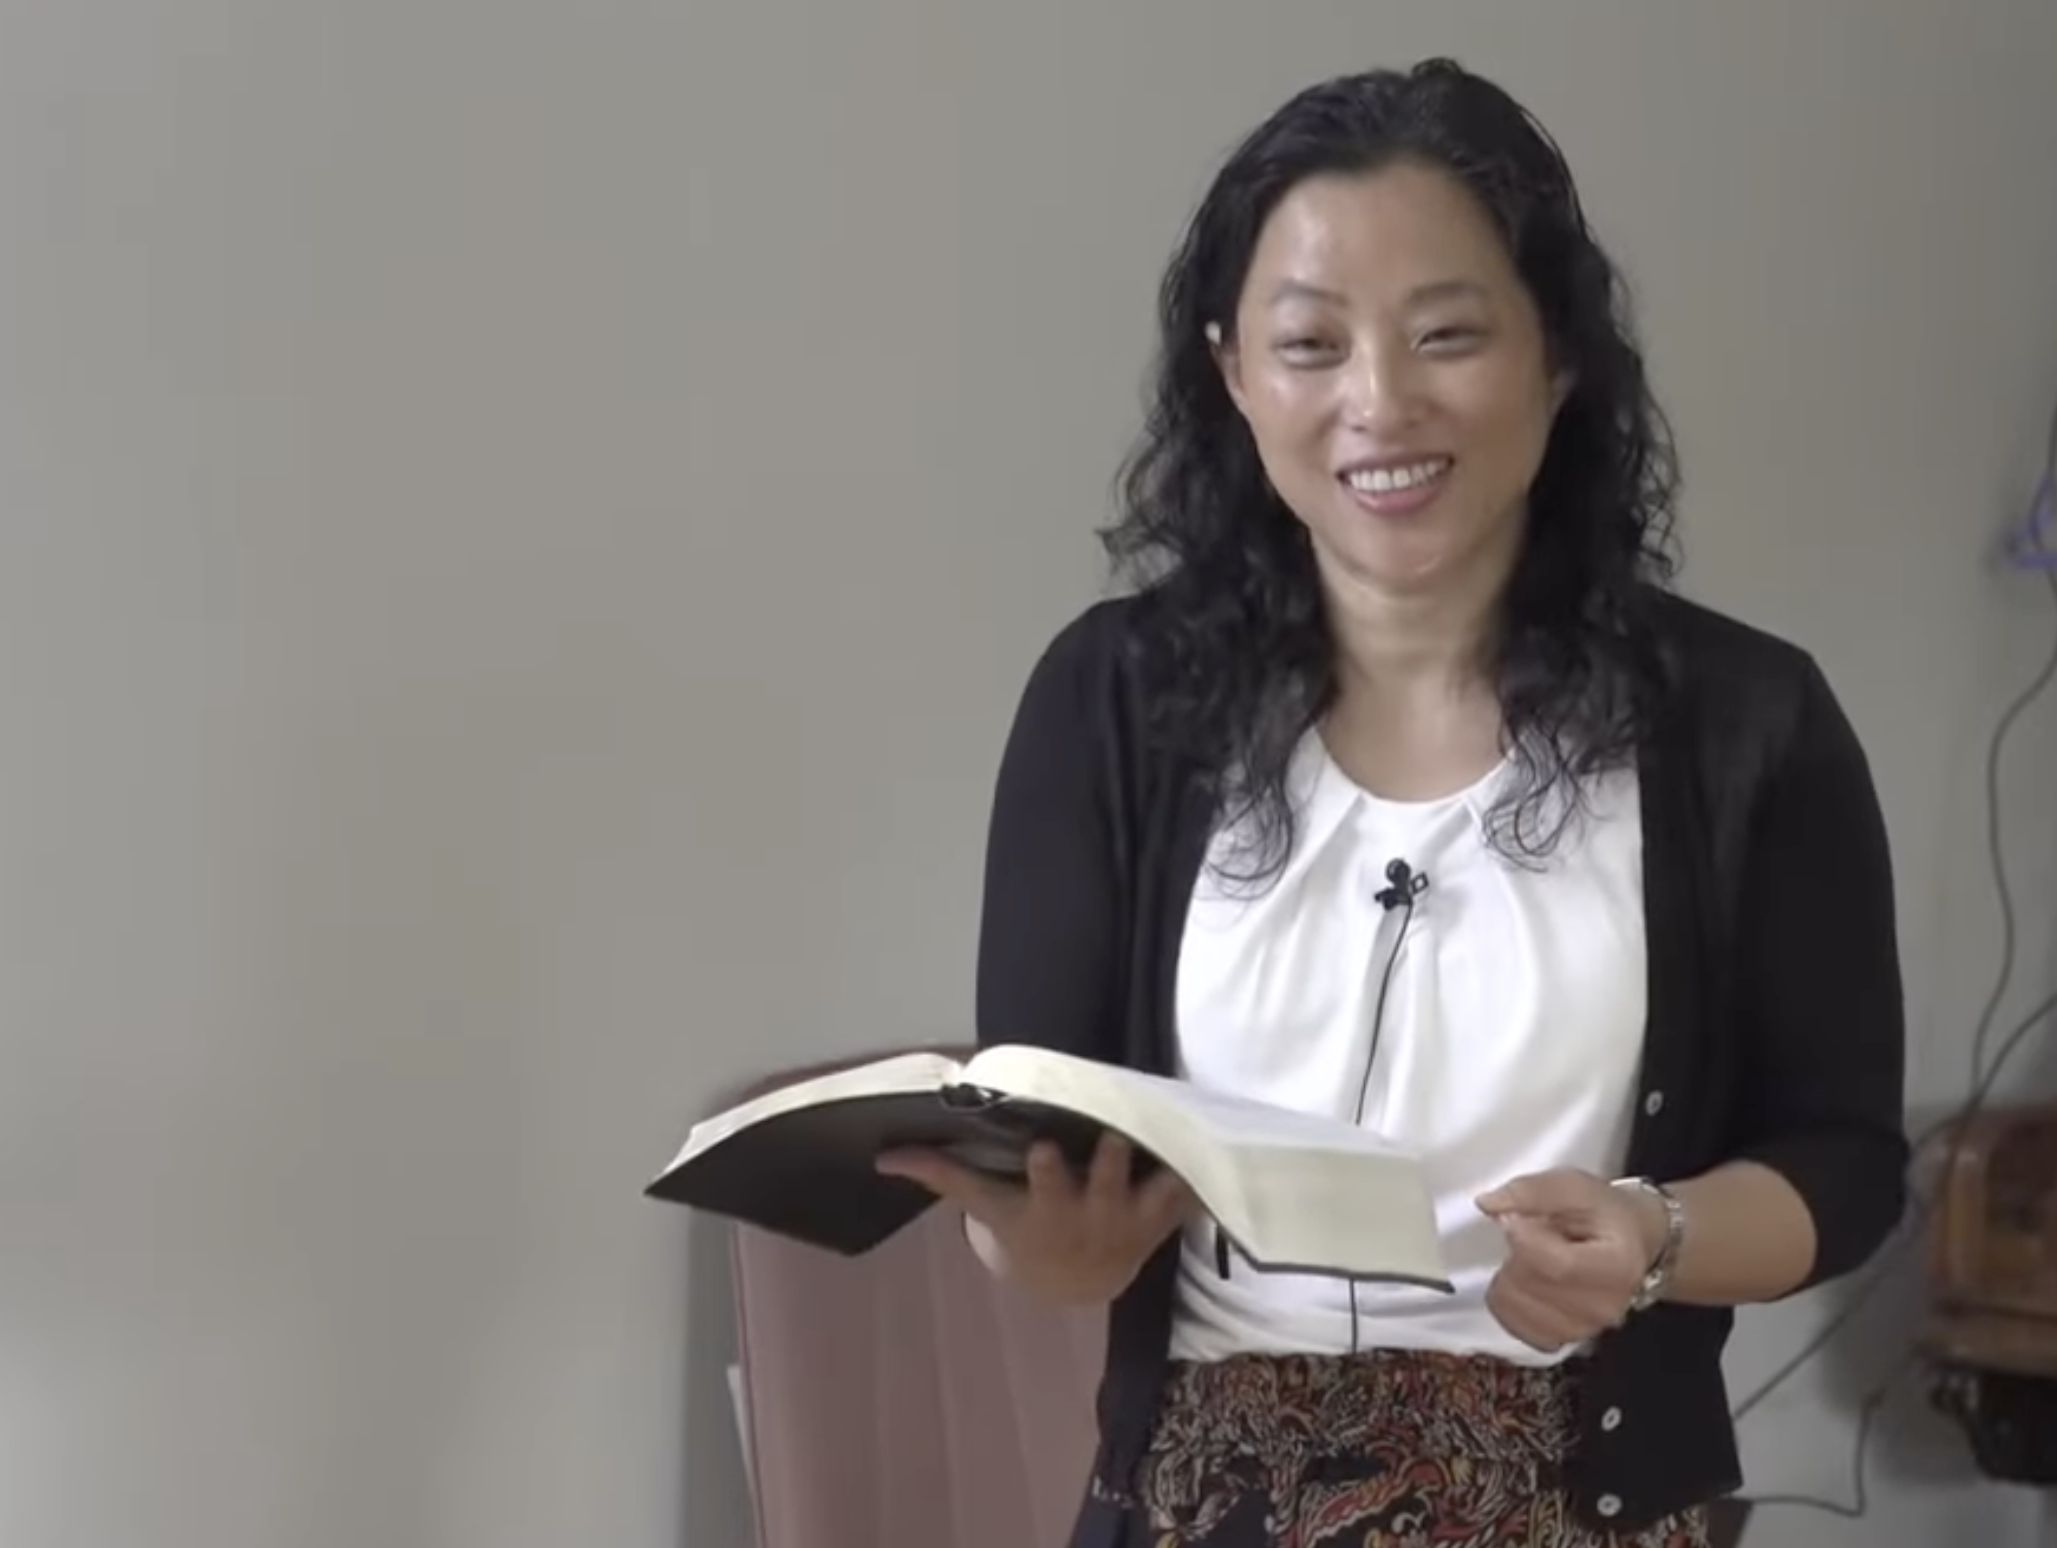 Life Lessons from Leprosy with Joy Cho